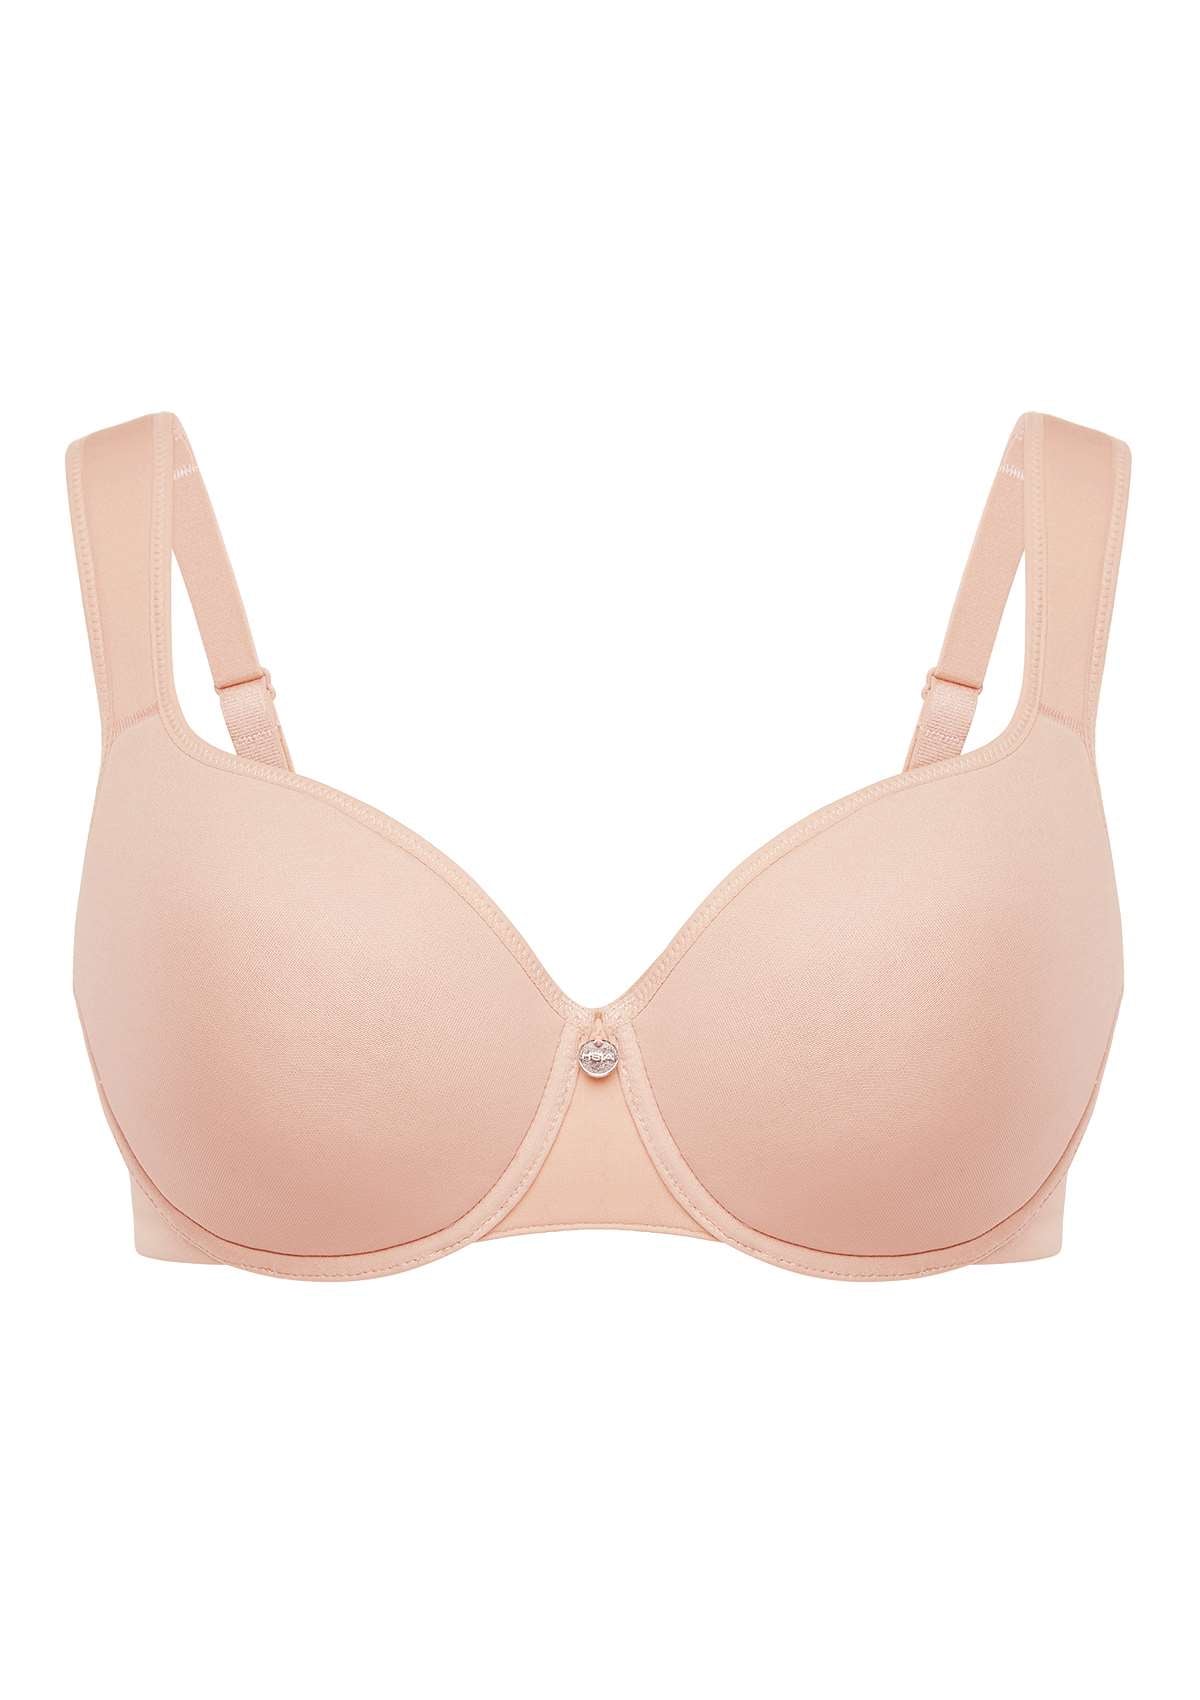 HSIA Patricia Smooth Classic T-shirt Lightly Padded Minimizer Bra - Light Pink / 34 / G